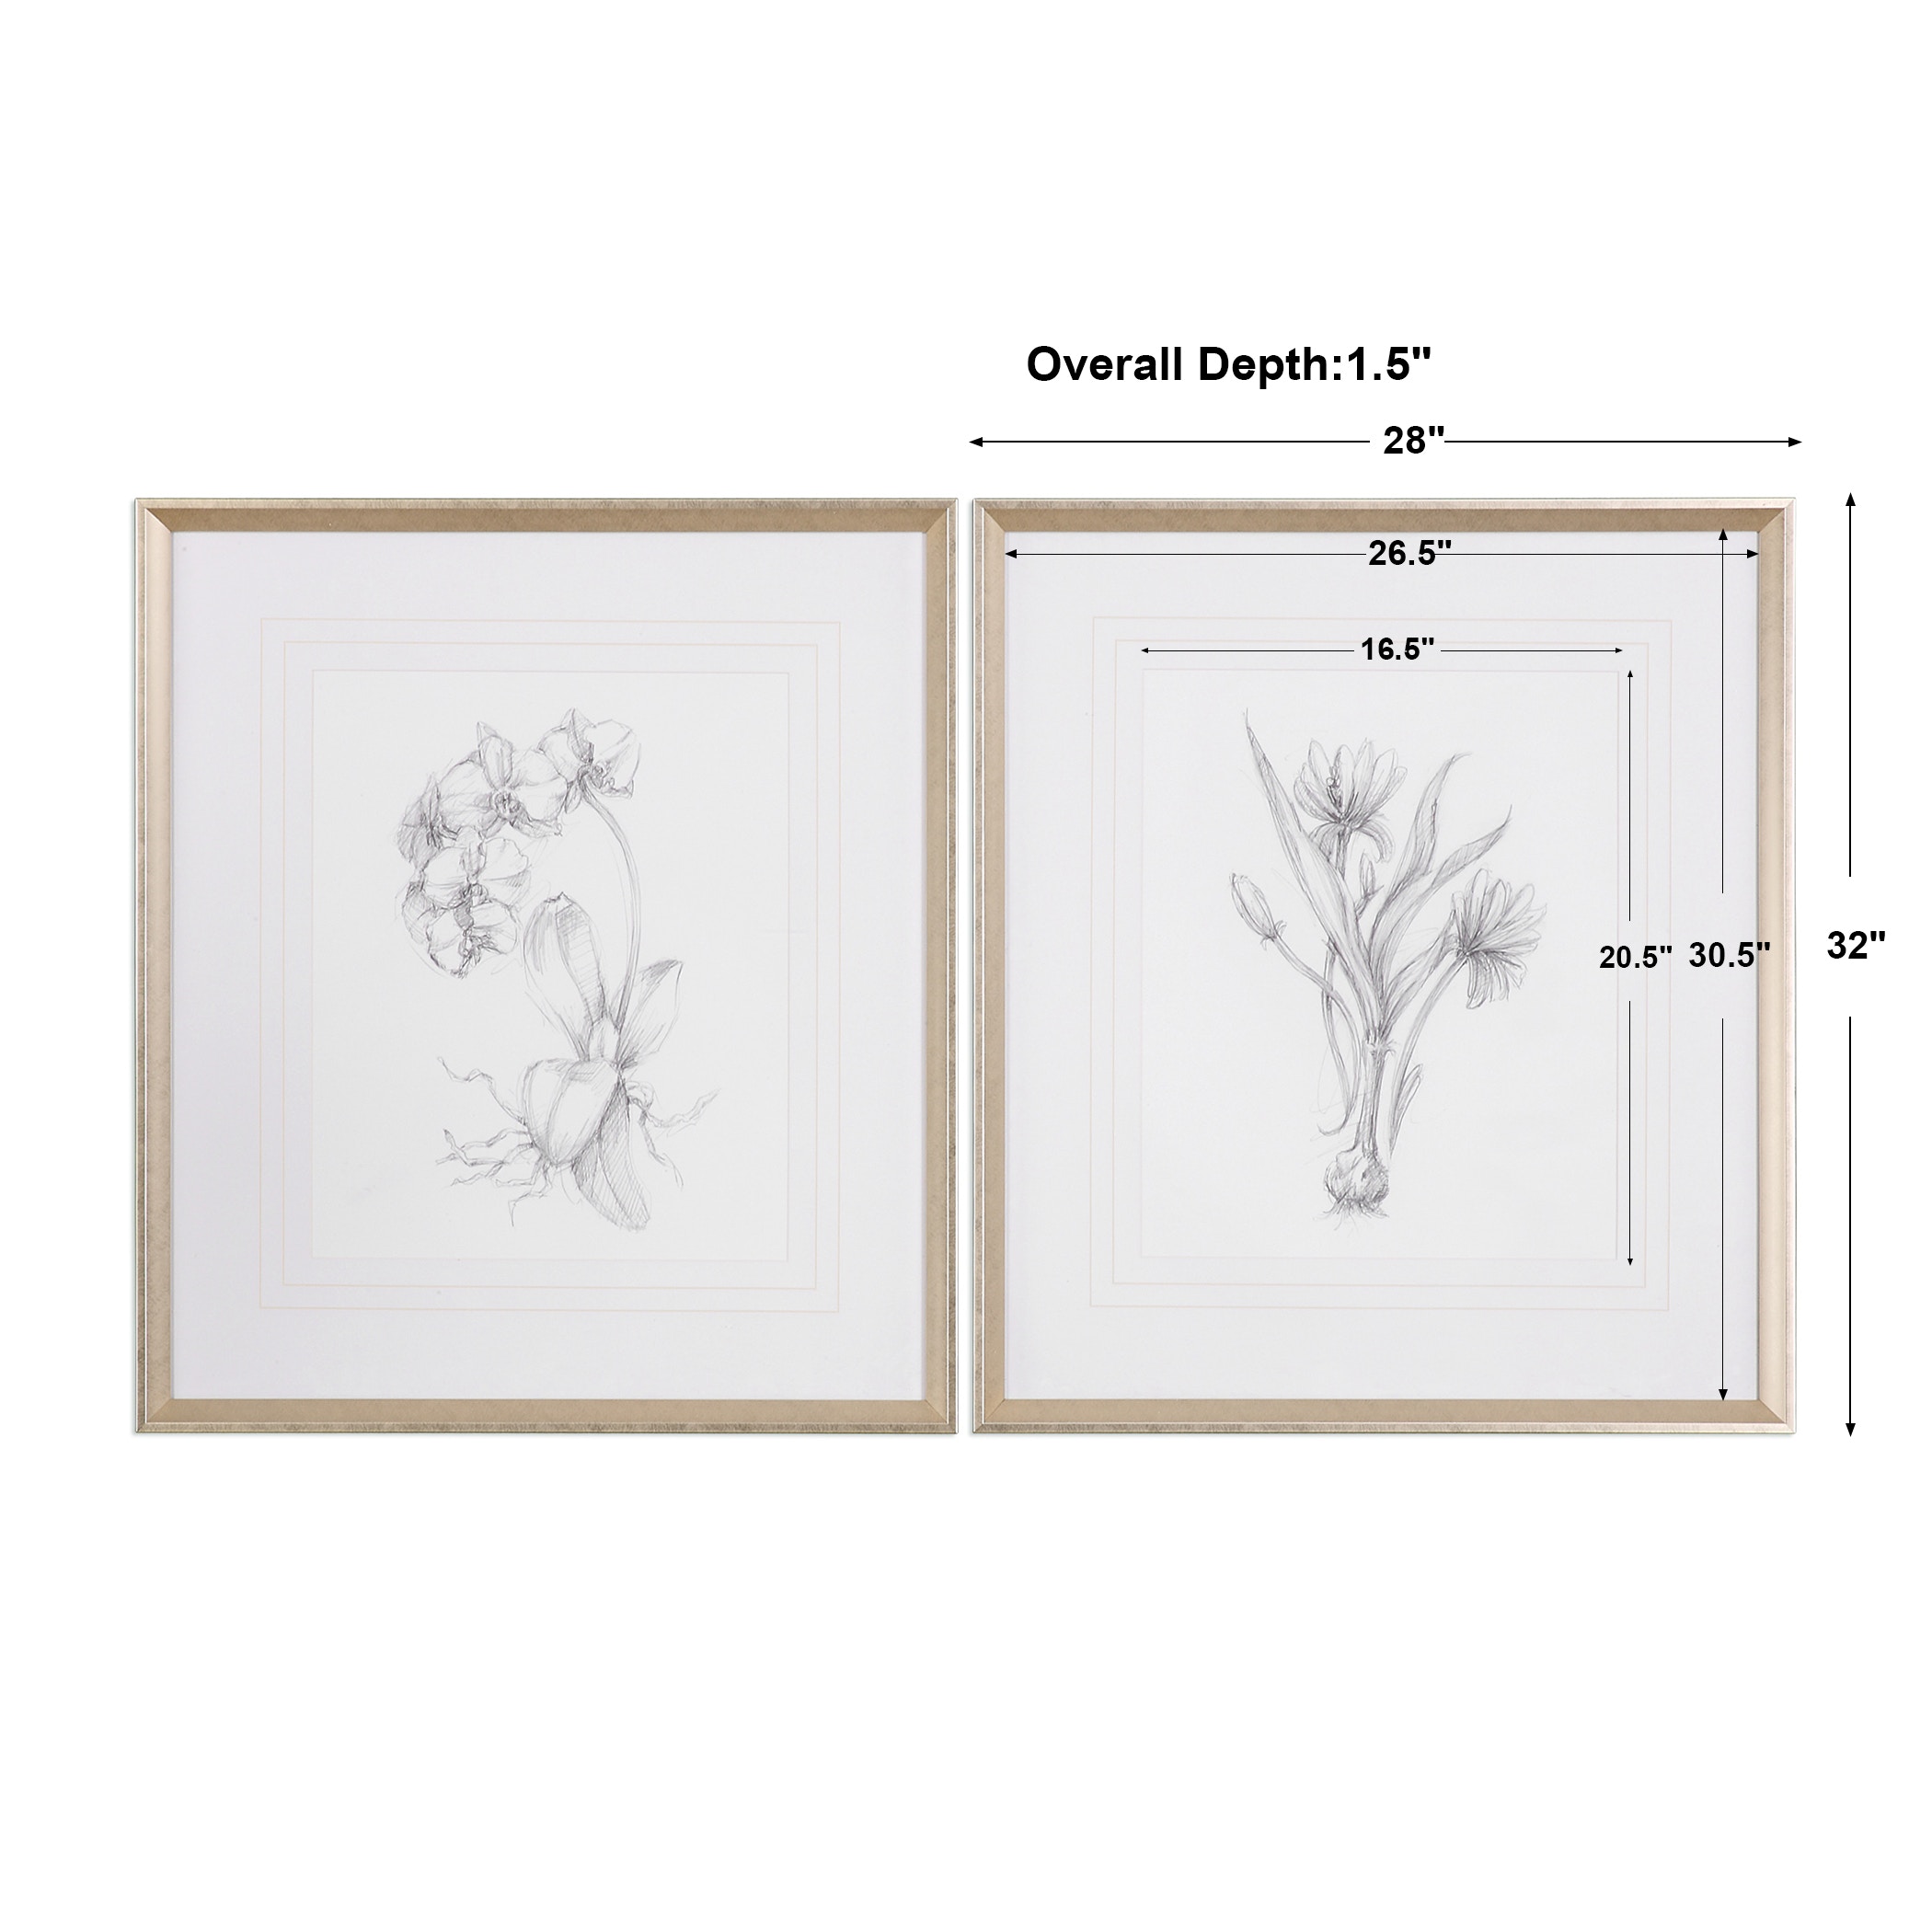 Uttermost Botanical Sketches Framed Prints S2 33649  Austin and Taylor   London Ontario